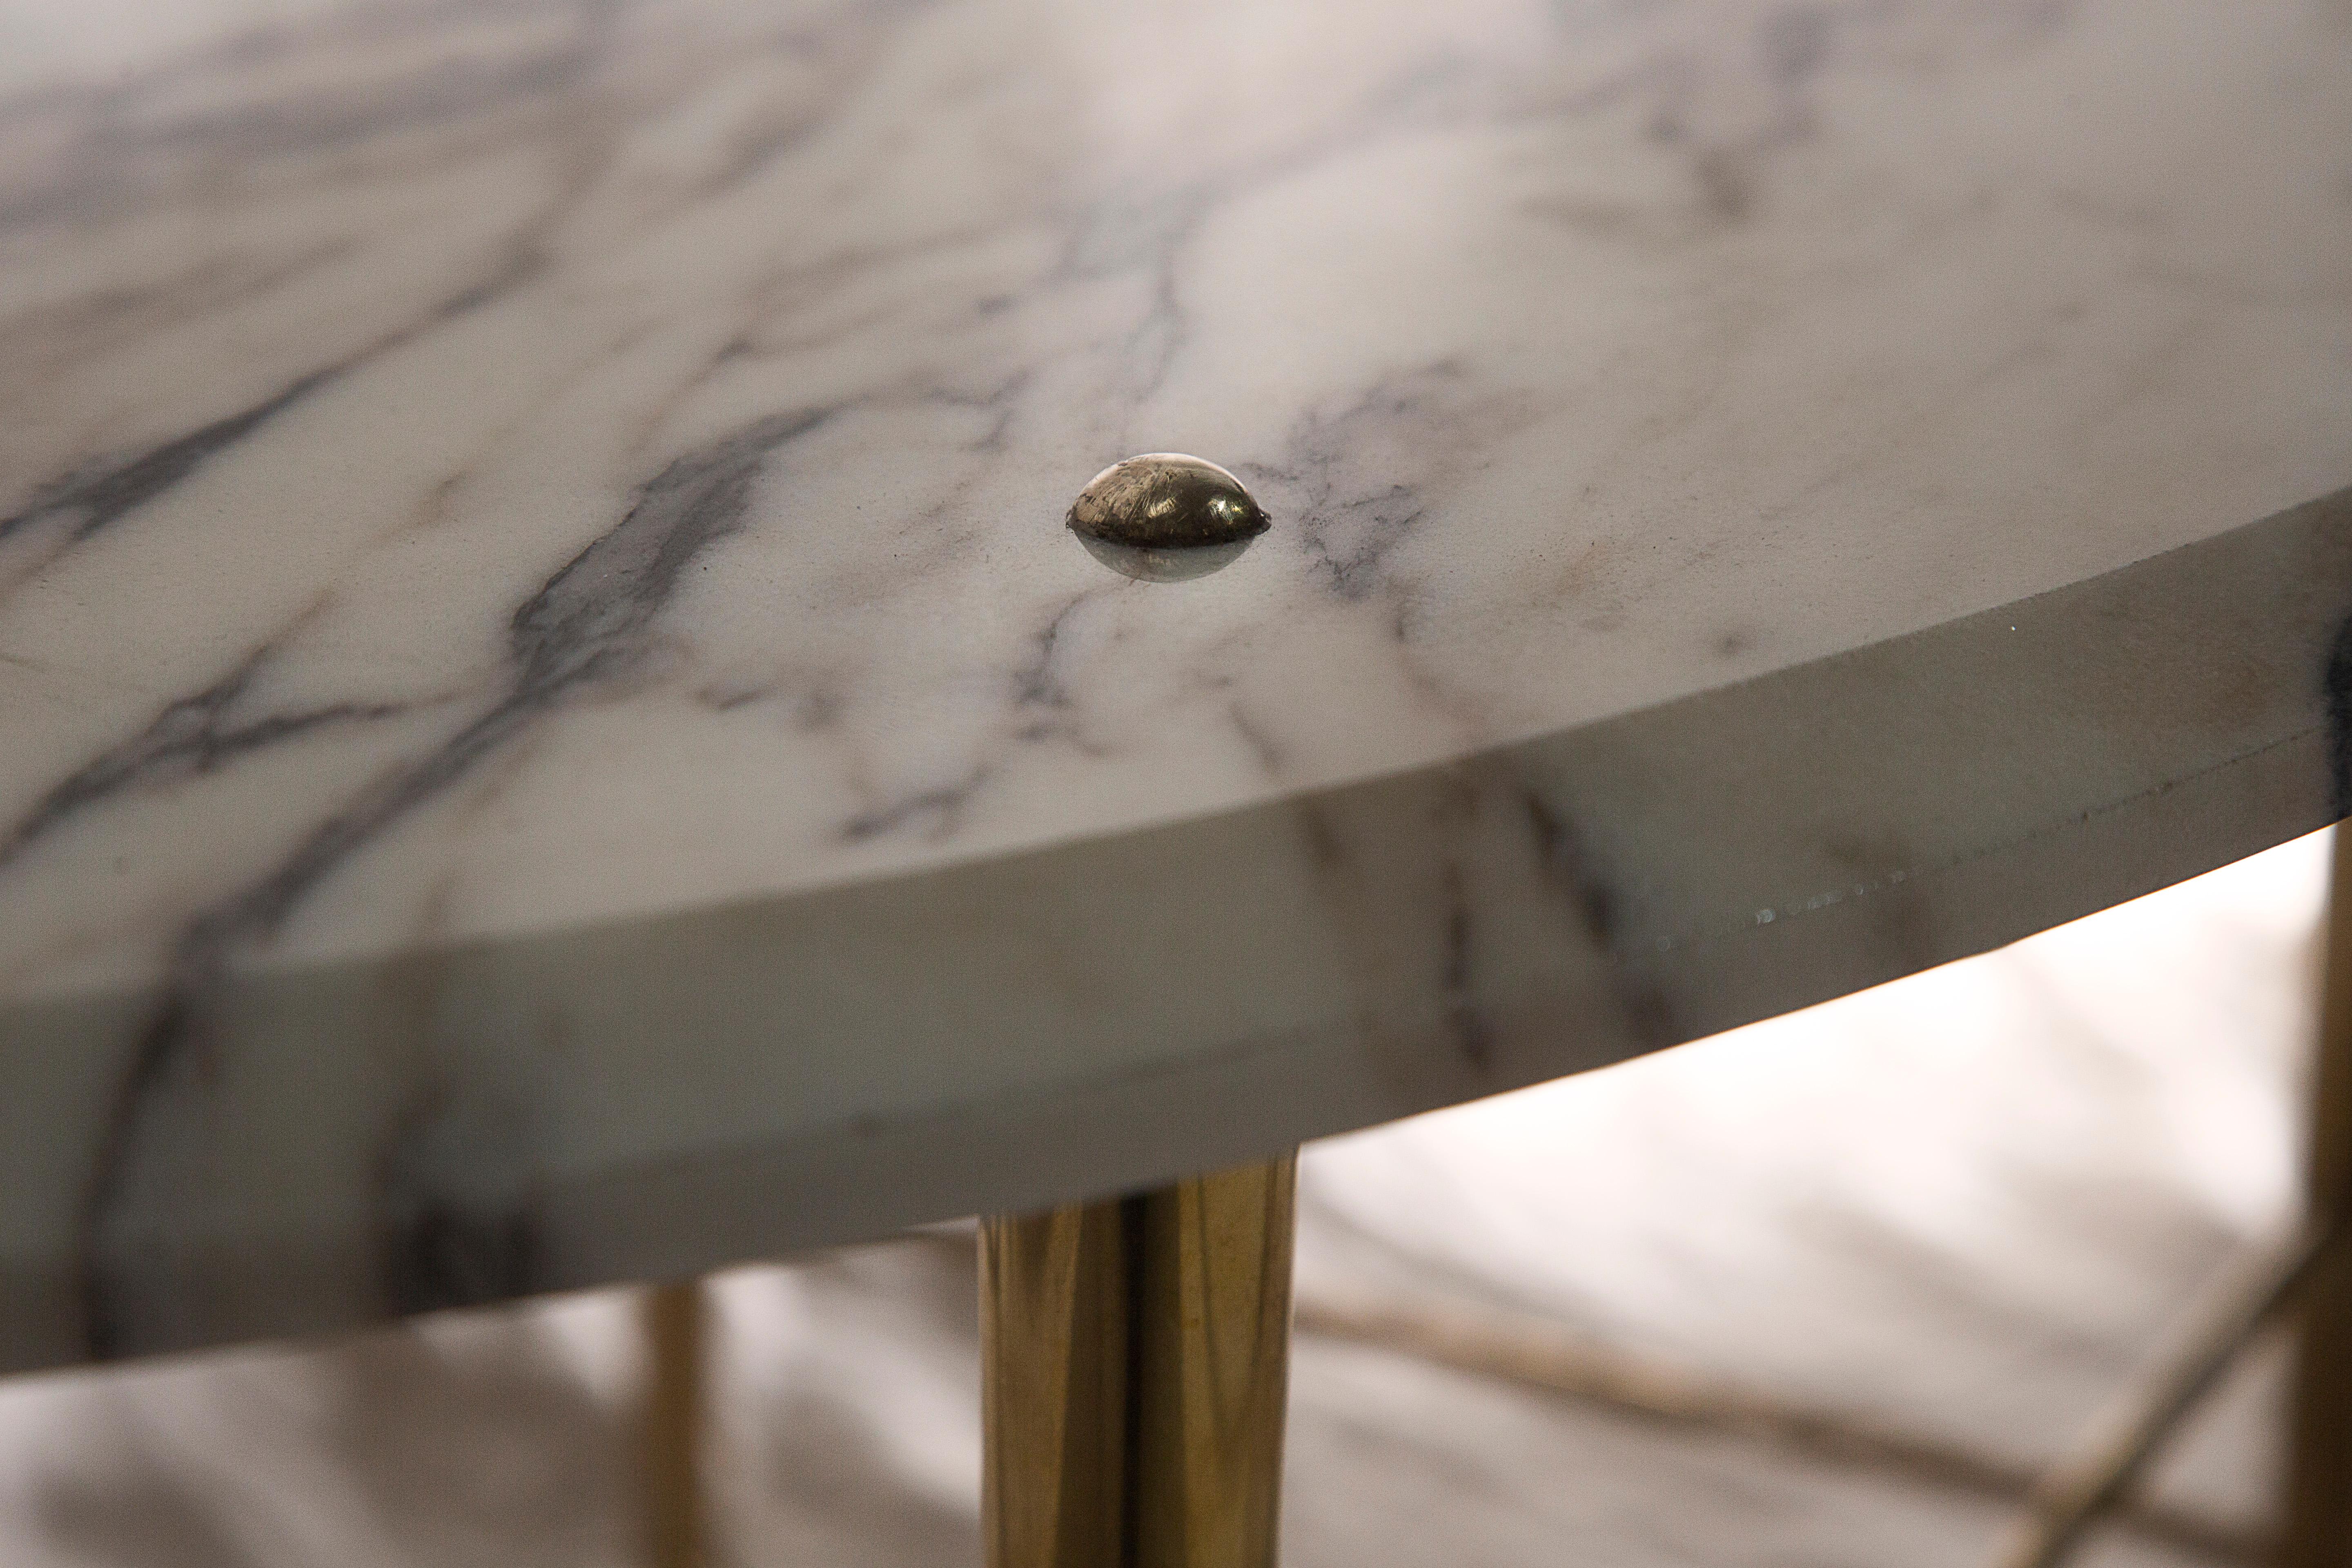 Stud Coffee Table in Vulcanatta Marble and Polished Brass — Large In New Condition For Sale In London, GB